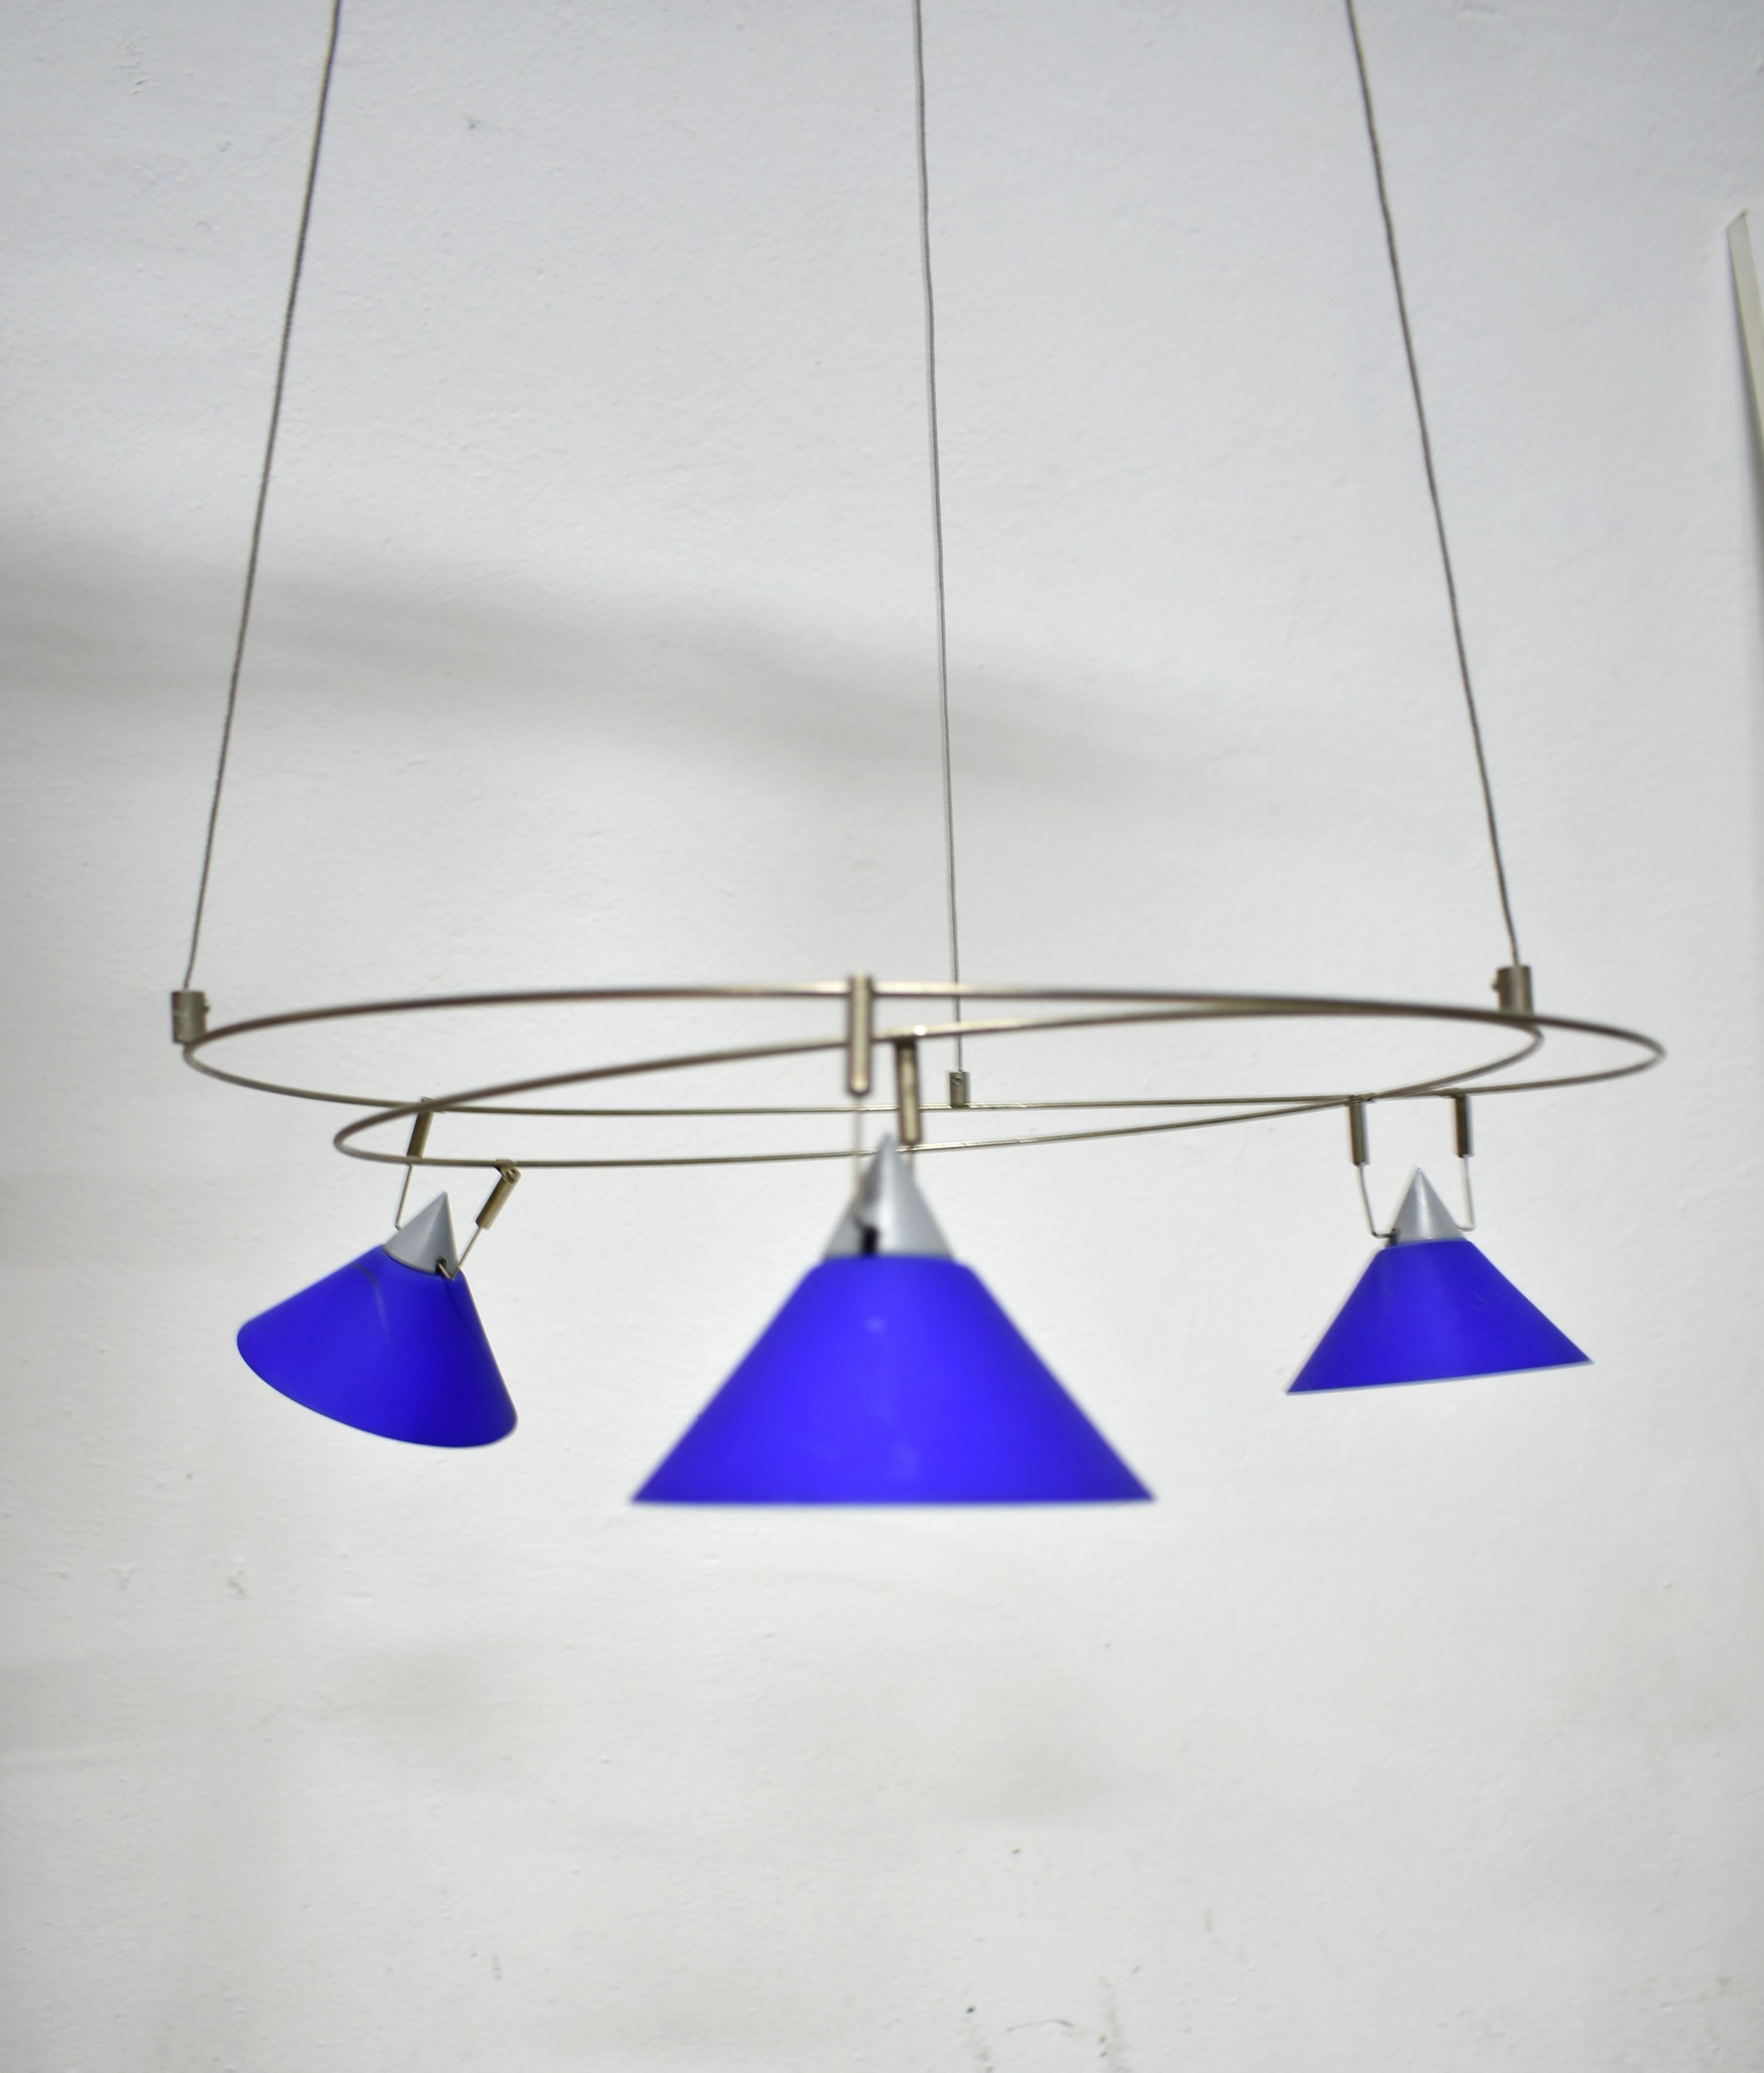 20th Century Postmodern Chandelier with 3 Halogen Spotlights in Blue Glass, Germany, 1980s